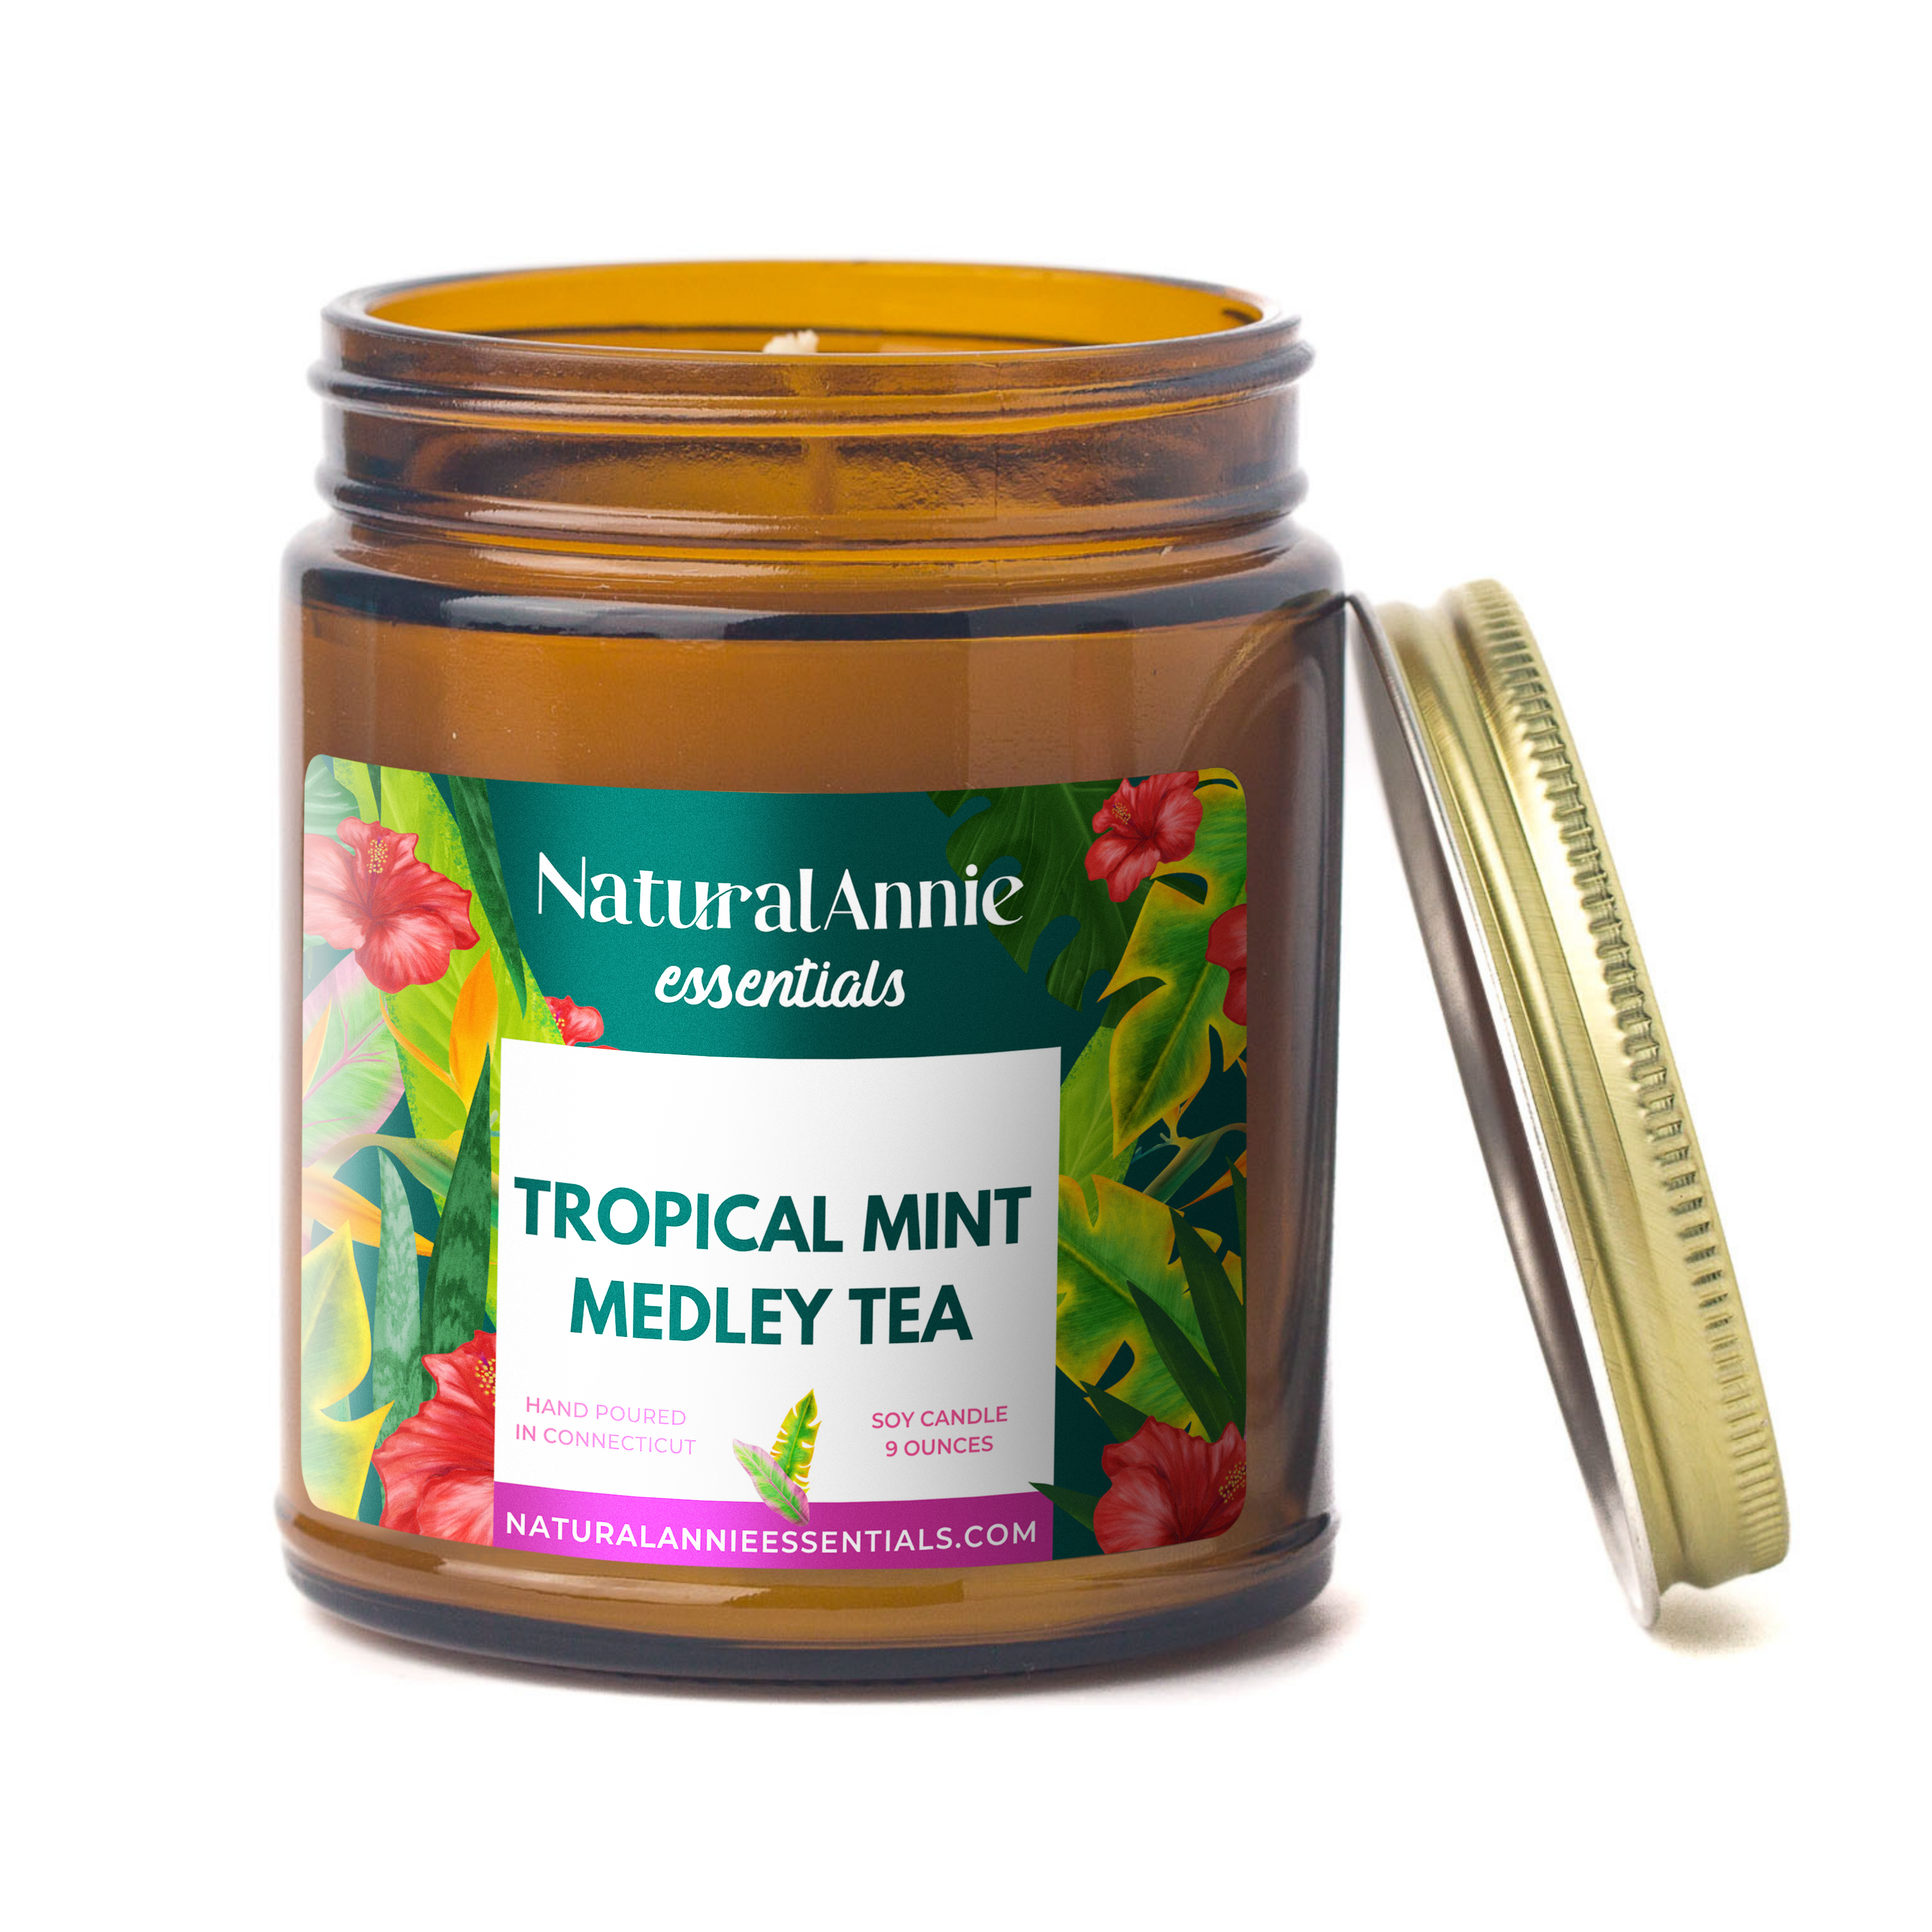 Tropical Mint Medley Tea 9oz Scented Soy Candle